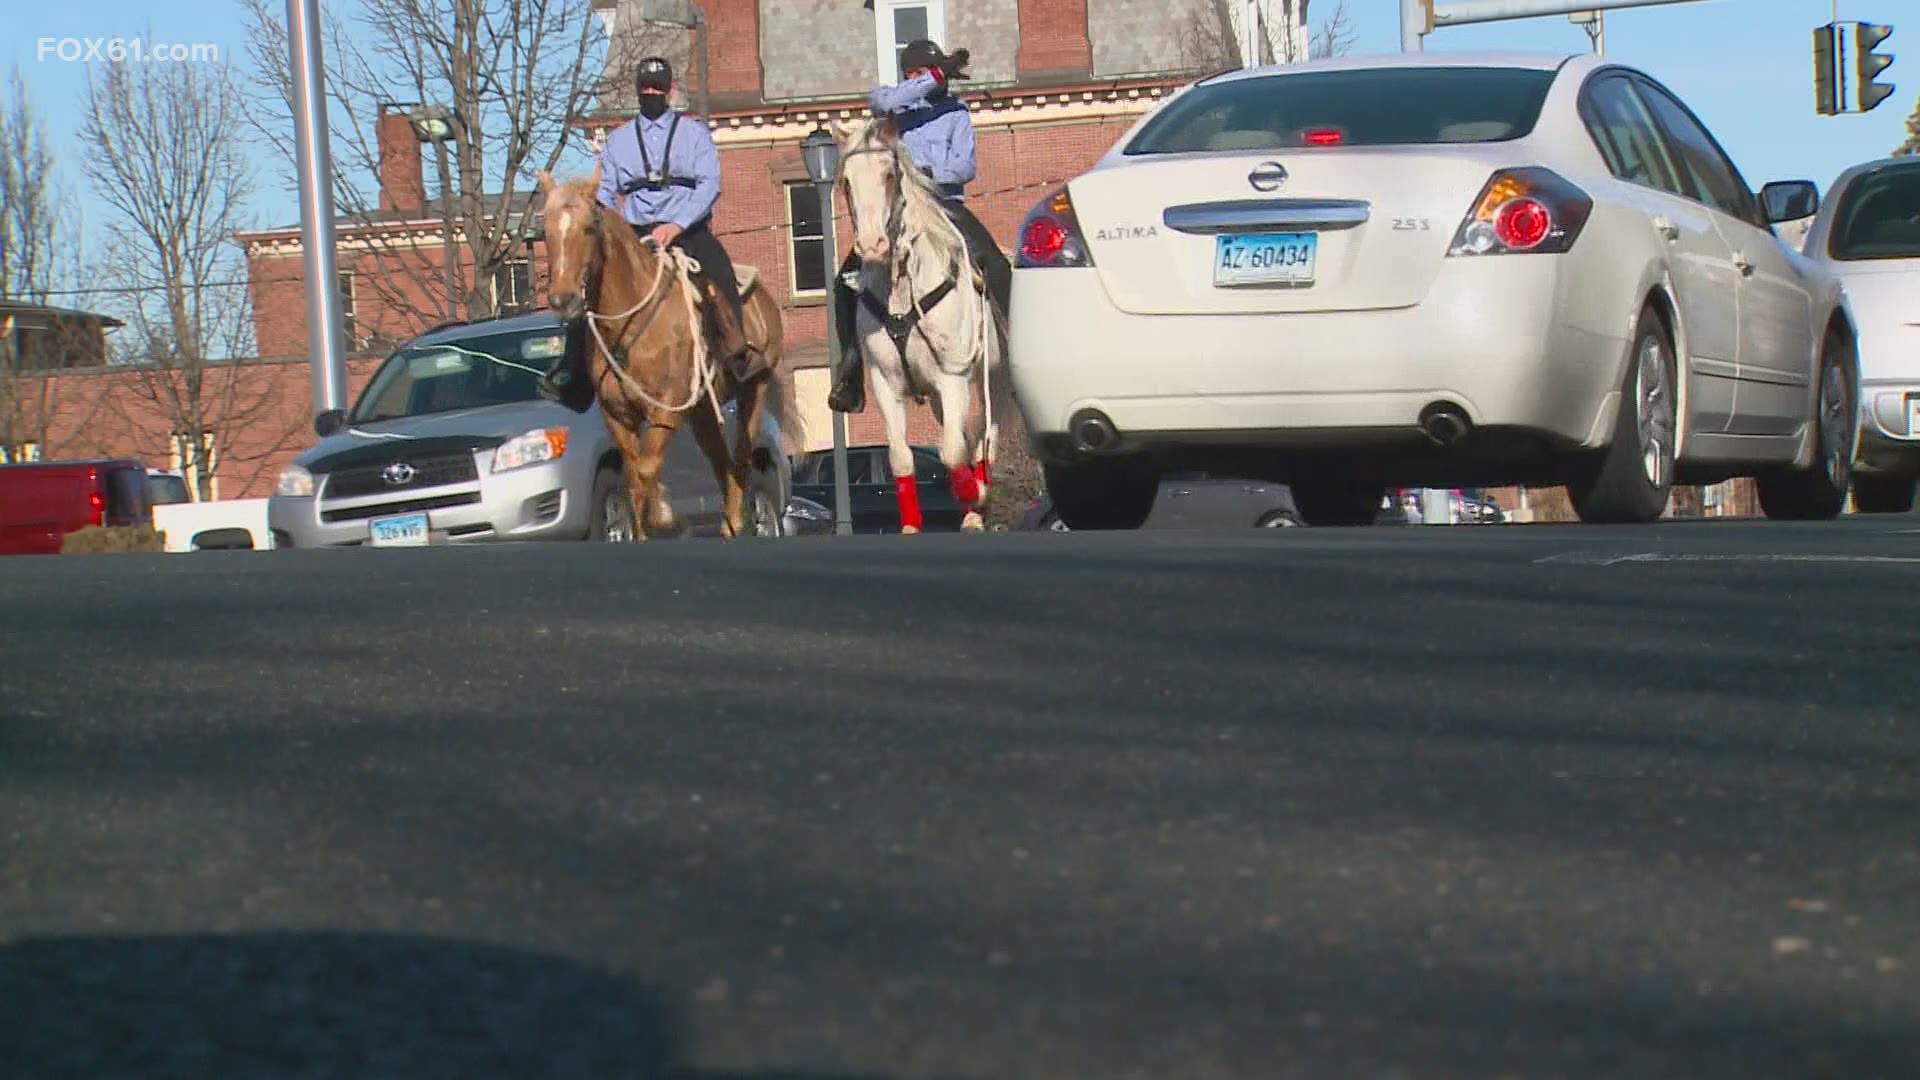 The organizers plan to try and take the horses into Hartford and surrounding areas two to three times a week when the weather gets warmer